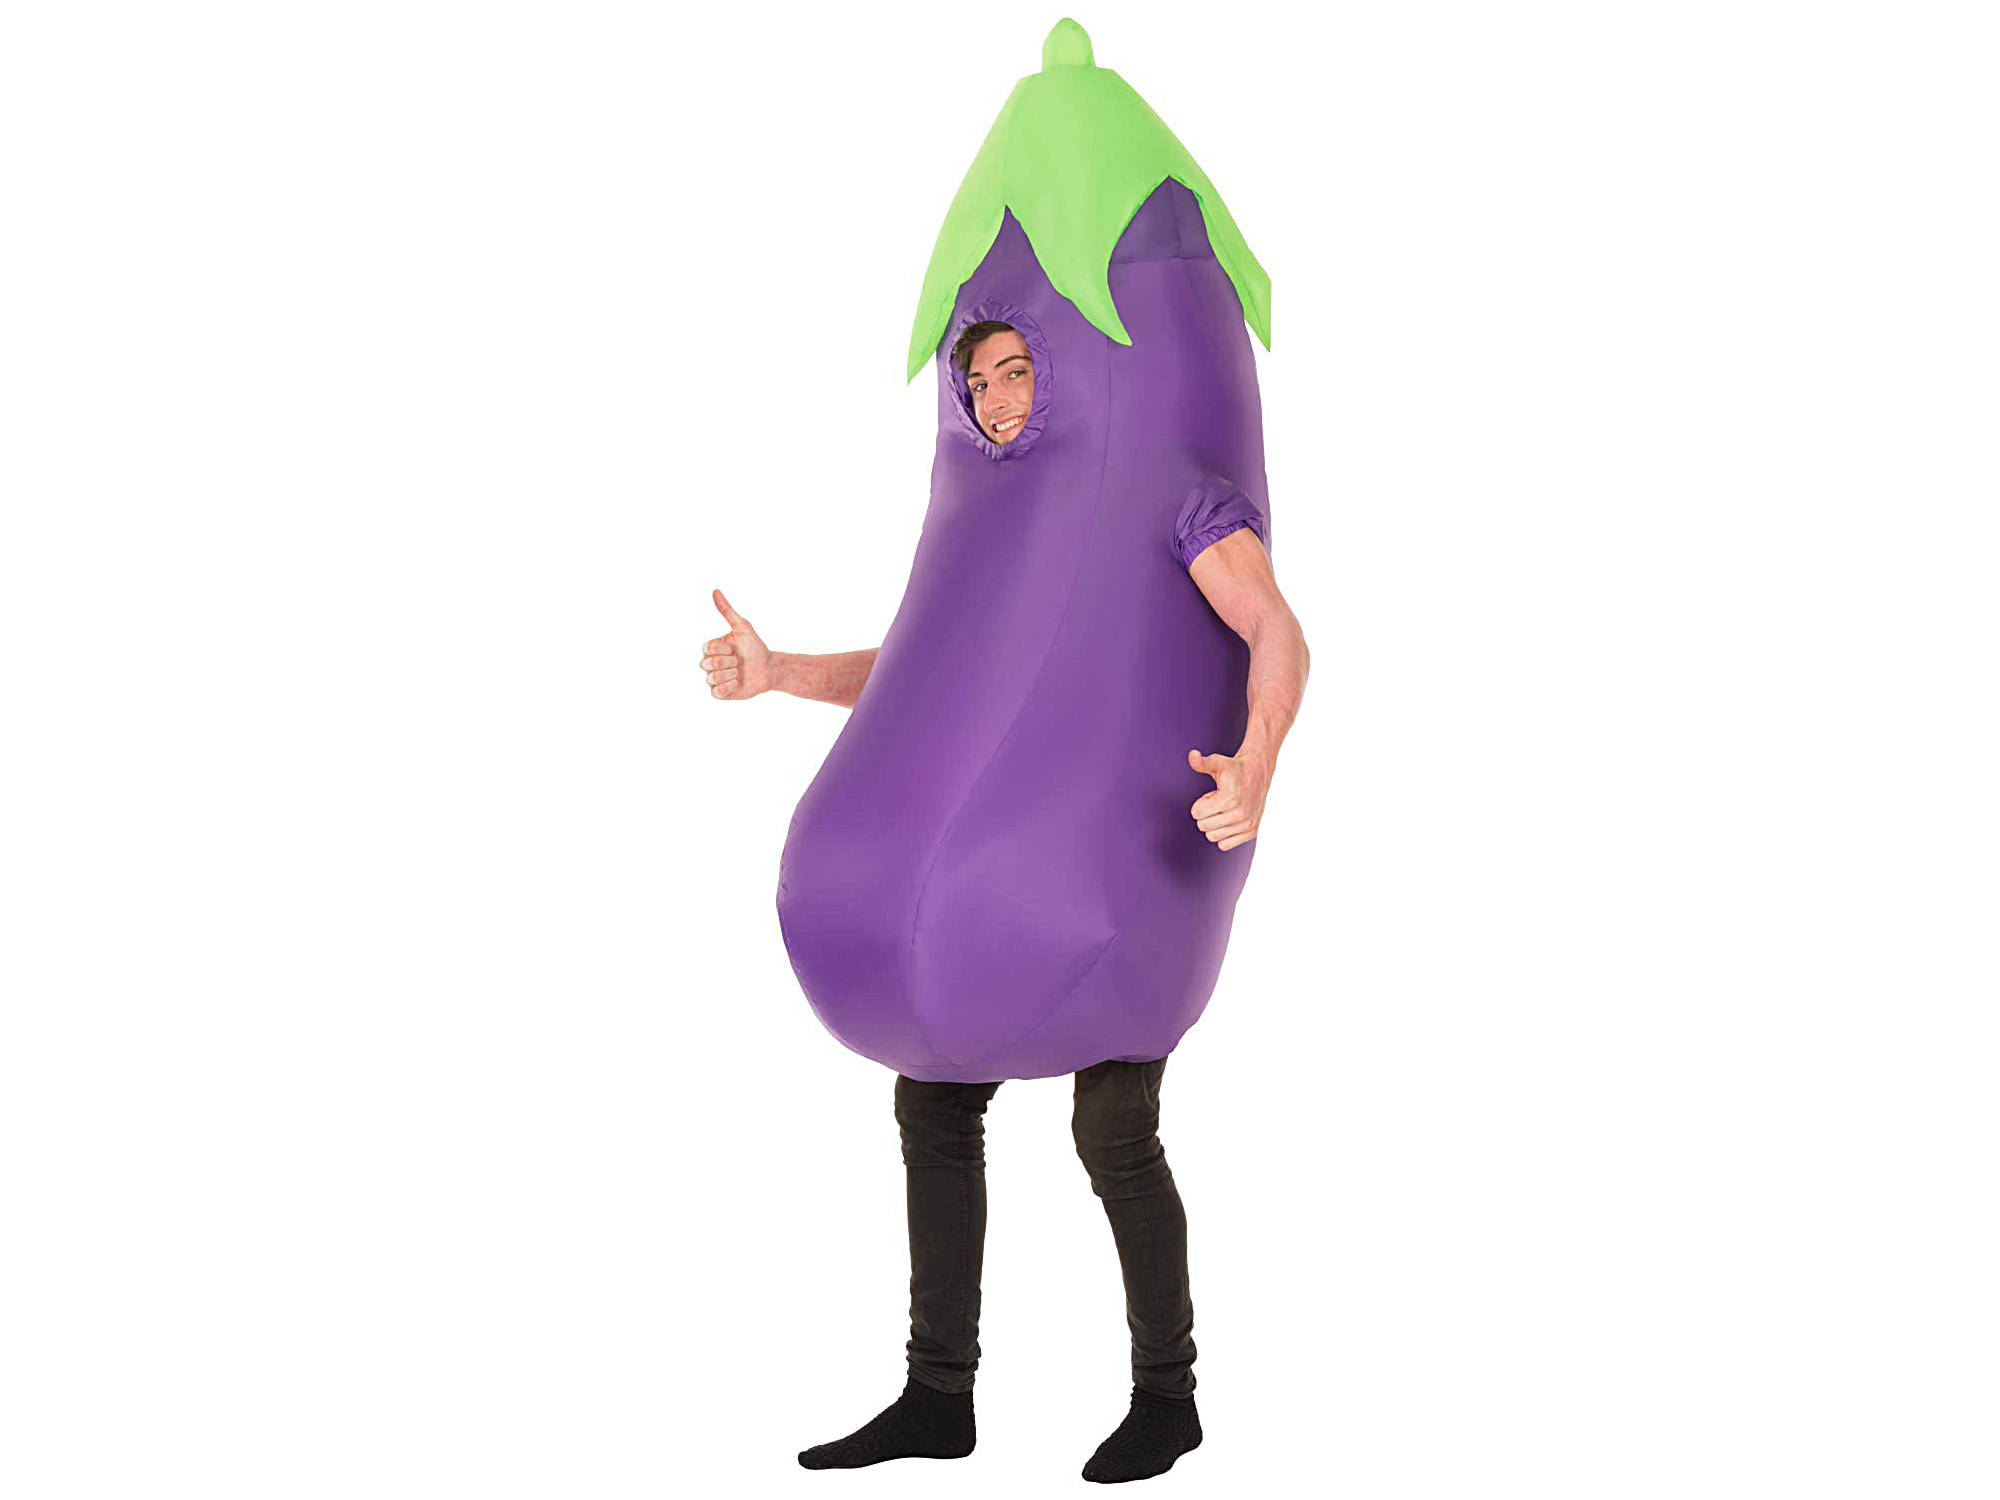 Giant Inflatable Egg Plant Emoji Outfit - Amazon